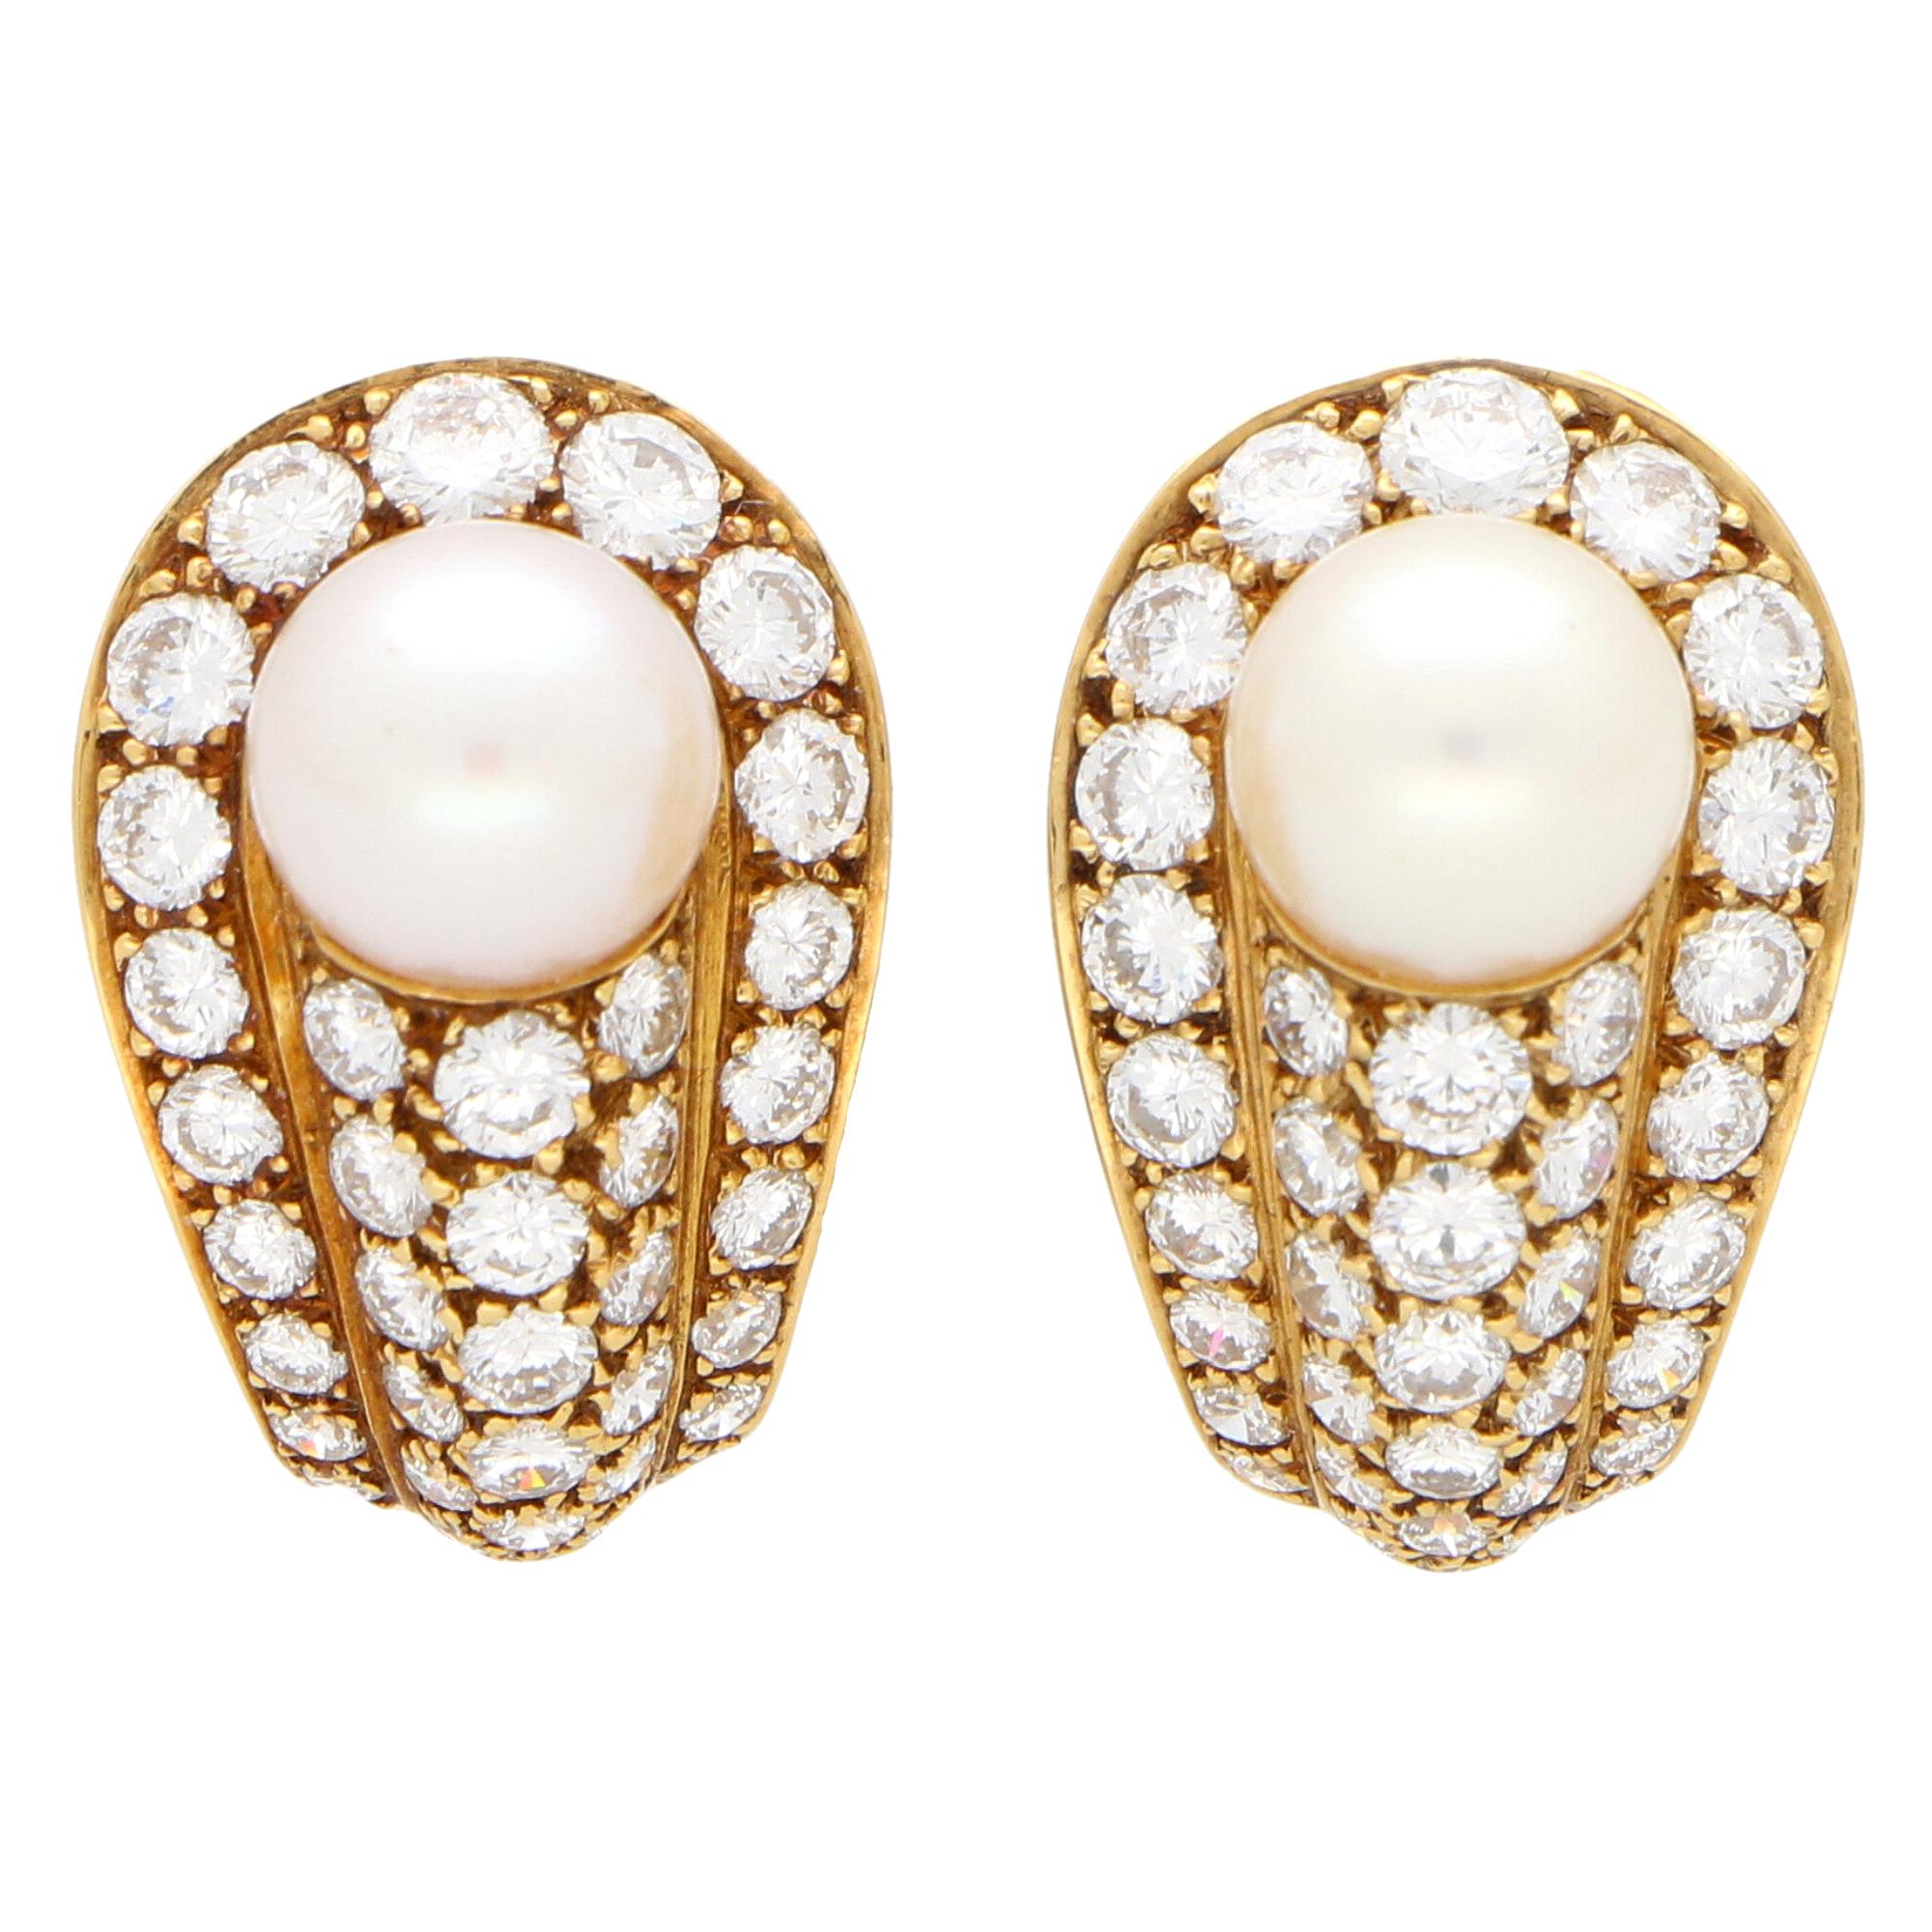 Vintage Cartier Pearl and Diamond Earrings Set in 18 Karat Yellow Gold